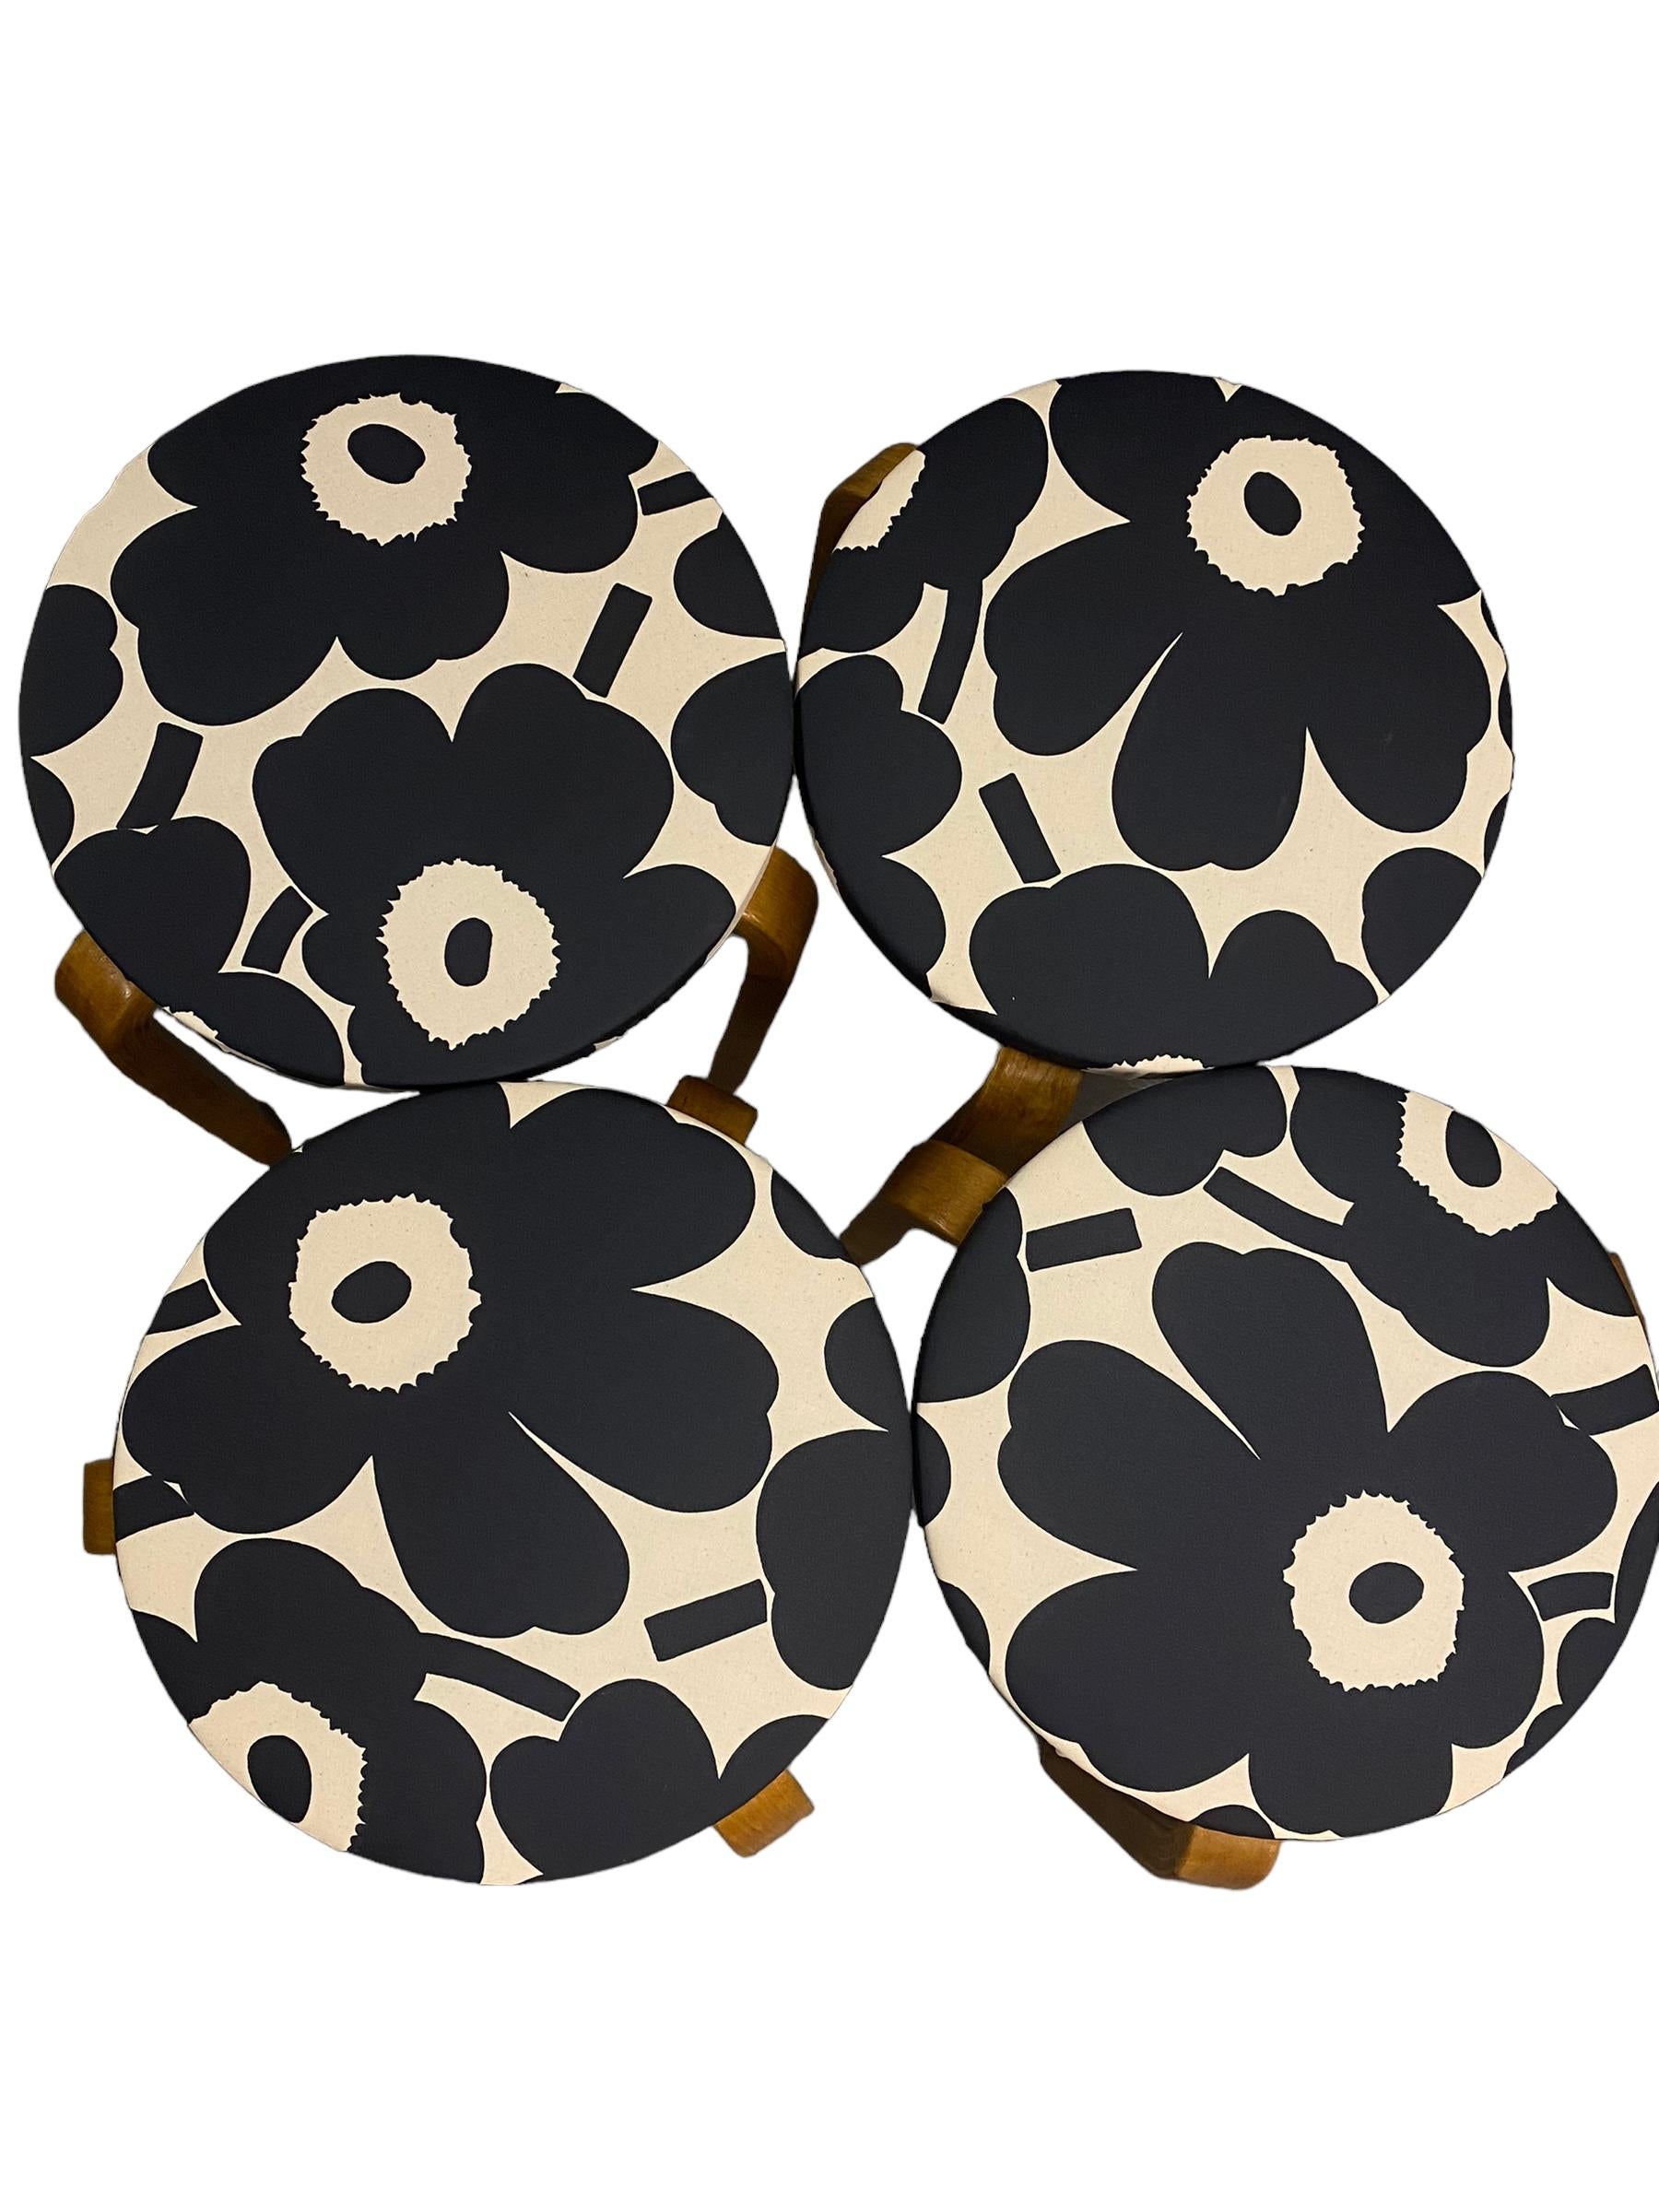 1940s Aino Aalto Table and 4 Aalto Stools in Marimekko Plastic Laminated Fabric. In Good Condition For Sale In Helsinki, FI